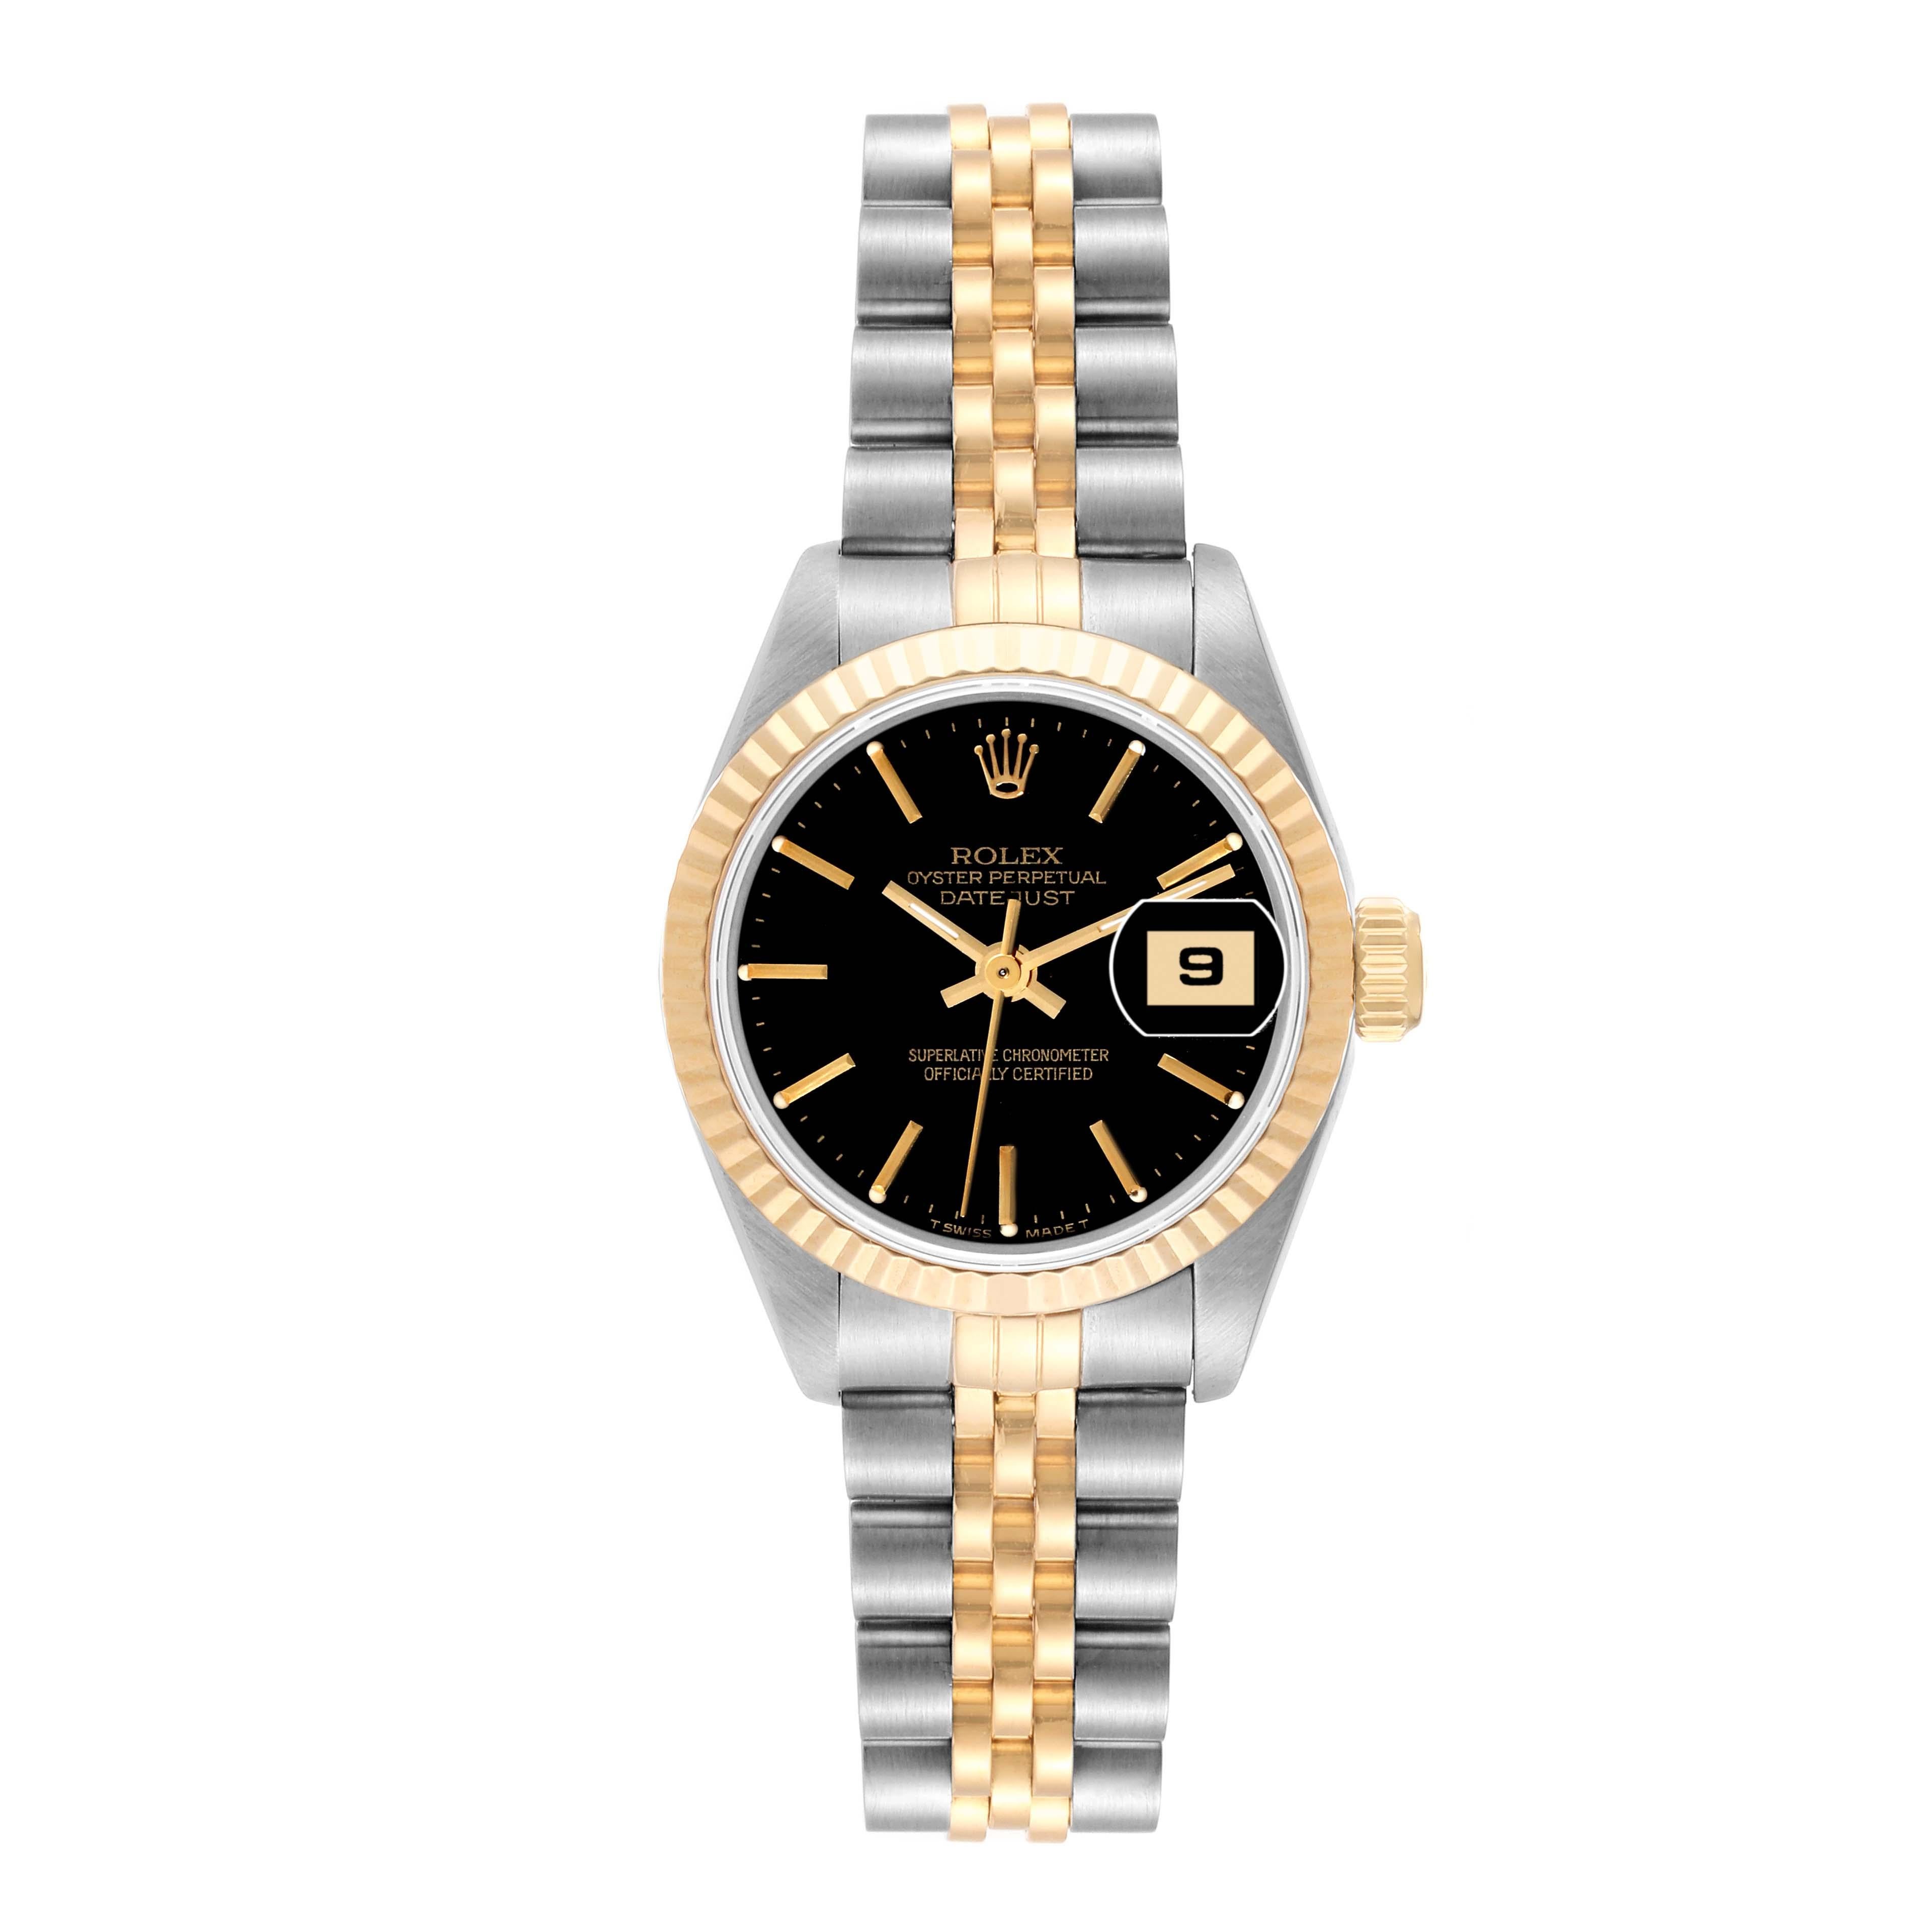 Rolex Datejust Steel Yellow Gold Black Dial Ladies Watch 69173. Officially certified chronometer automatic self-winding movement. Stainless steel oyster case 26.0 mm in diameter. Rolex logo on the crown. 18k yellow gold fluted bezel. Scratch